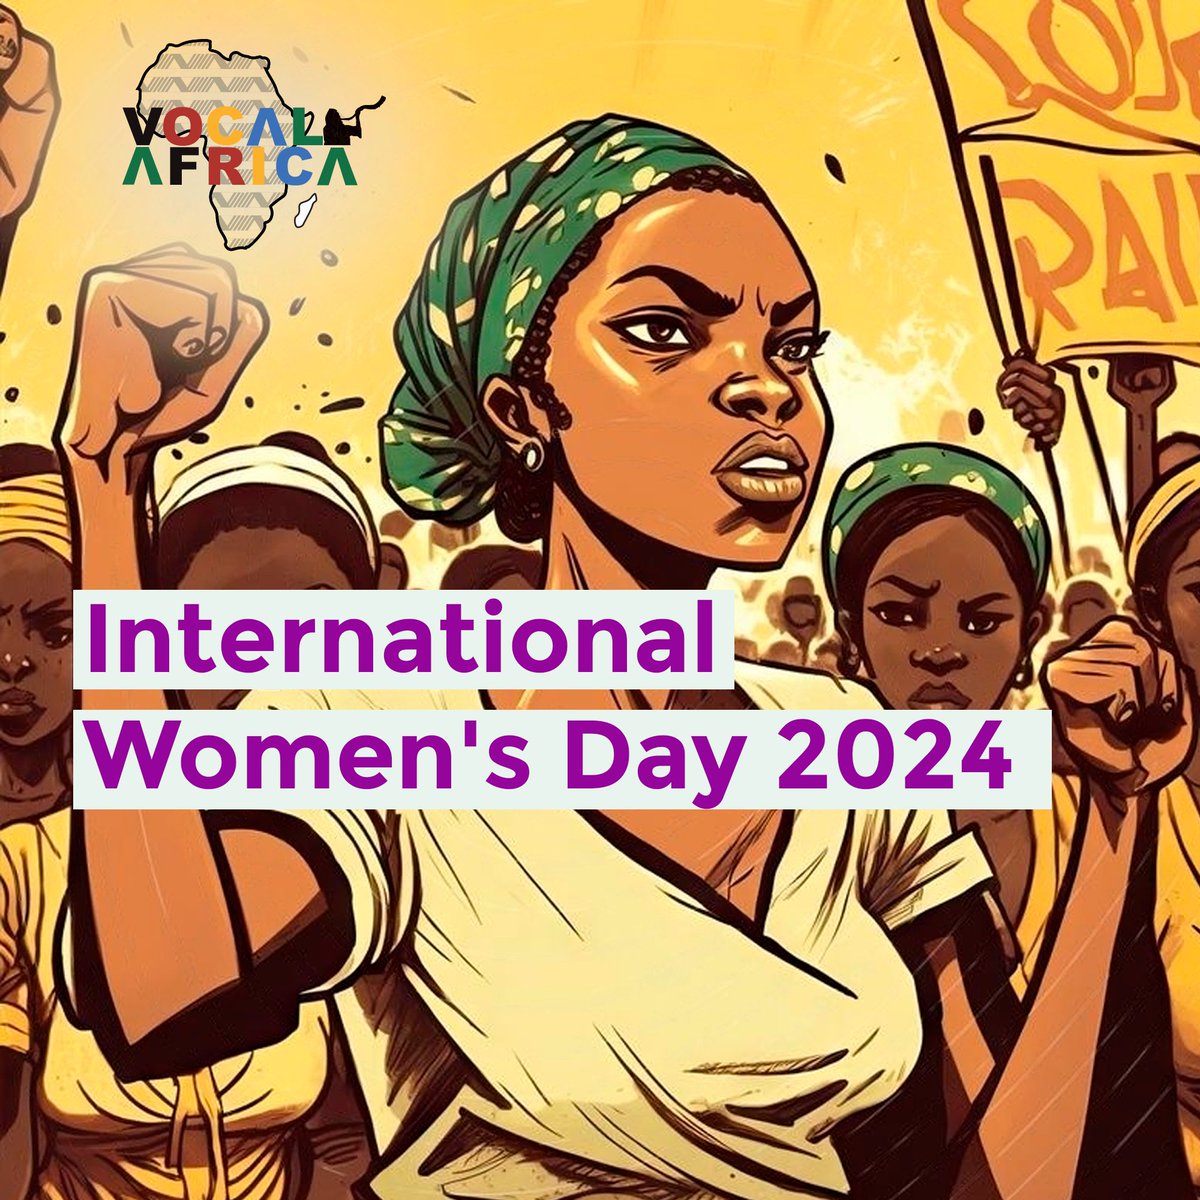 This #InternationalWomensDay, let's accelerate progress on diversity and human rights in Africa by investing in women leaders, activists and changemakers. Read how women drive pluralism and rights across the continent: vocalafrica.org/investing-in-a… #IWD2024